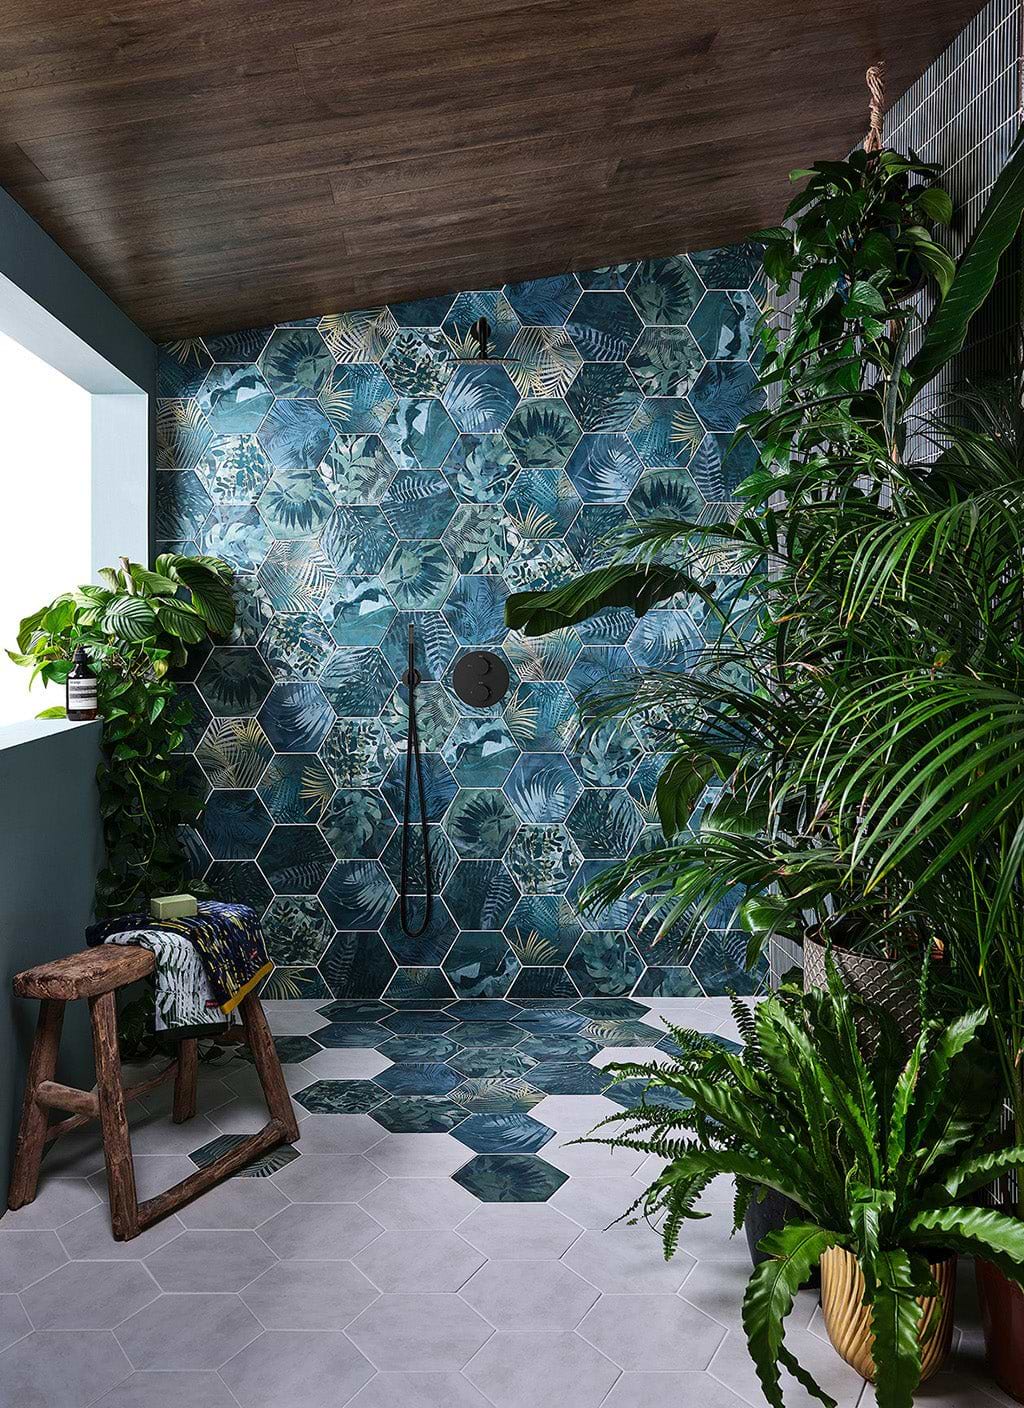 Hexagonal tiles: why choose this trend for your home? - Hyperion Tiles